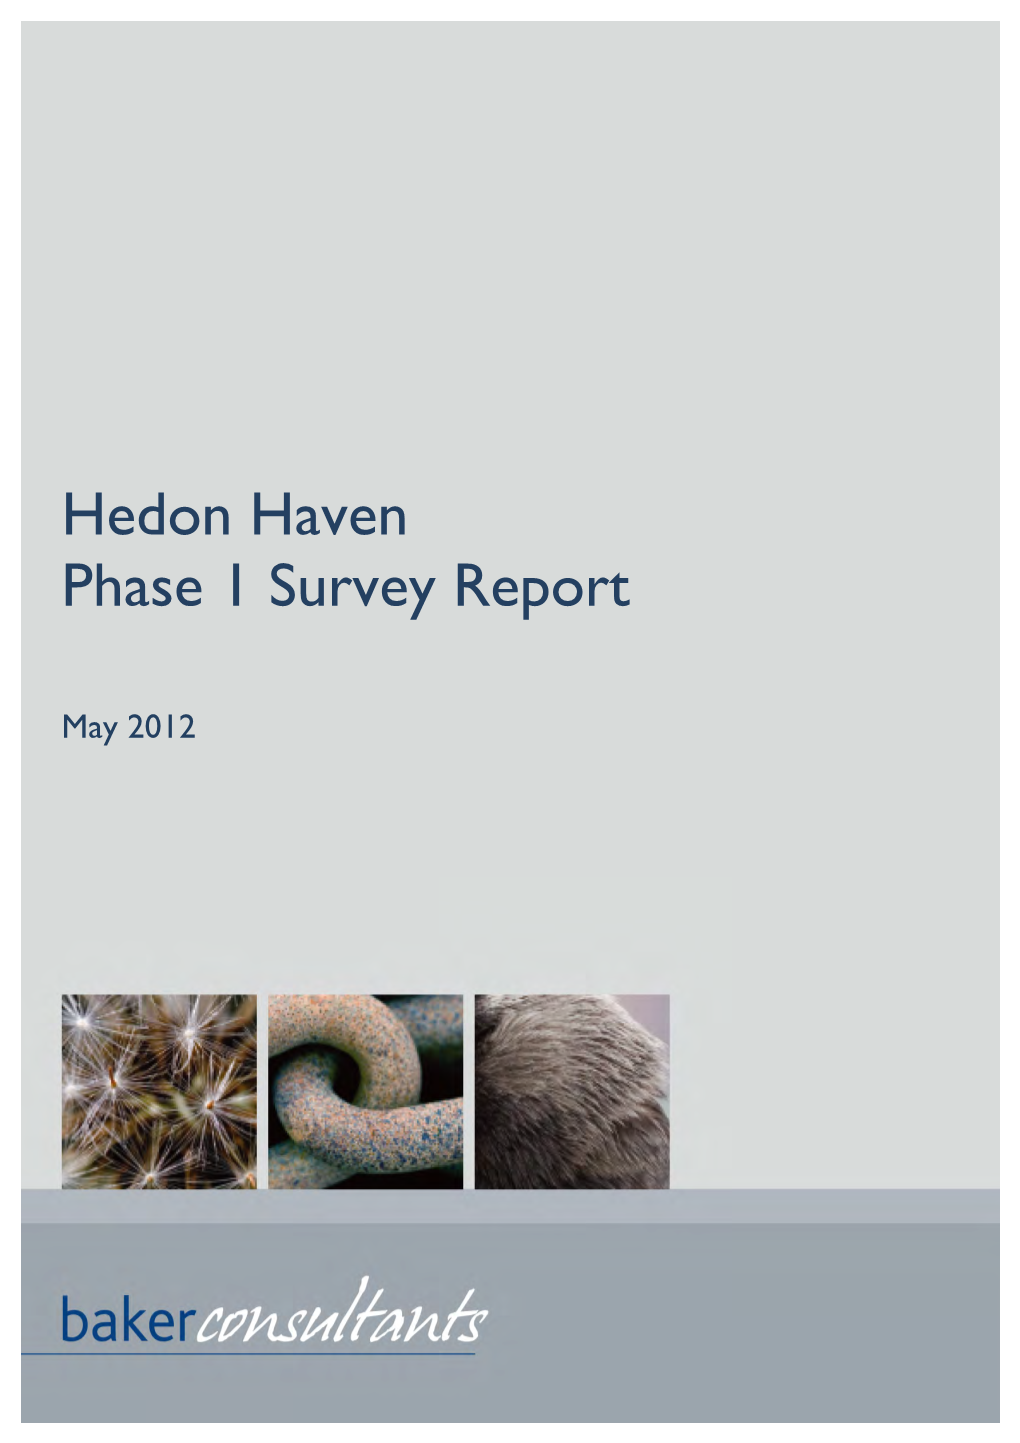 Hedon Haven Phase 1 Survey Report